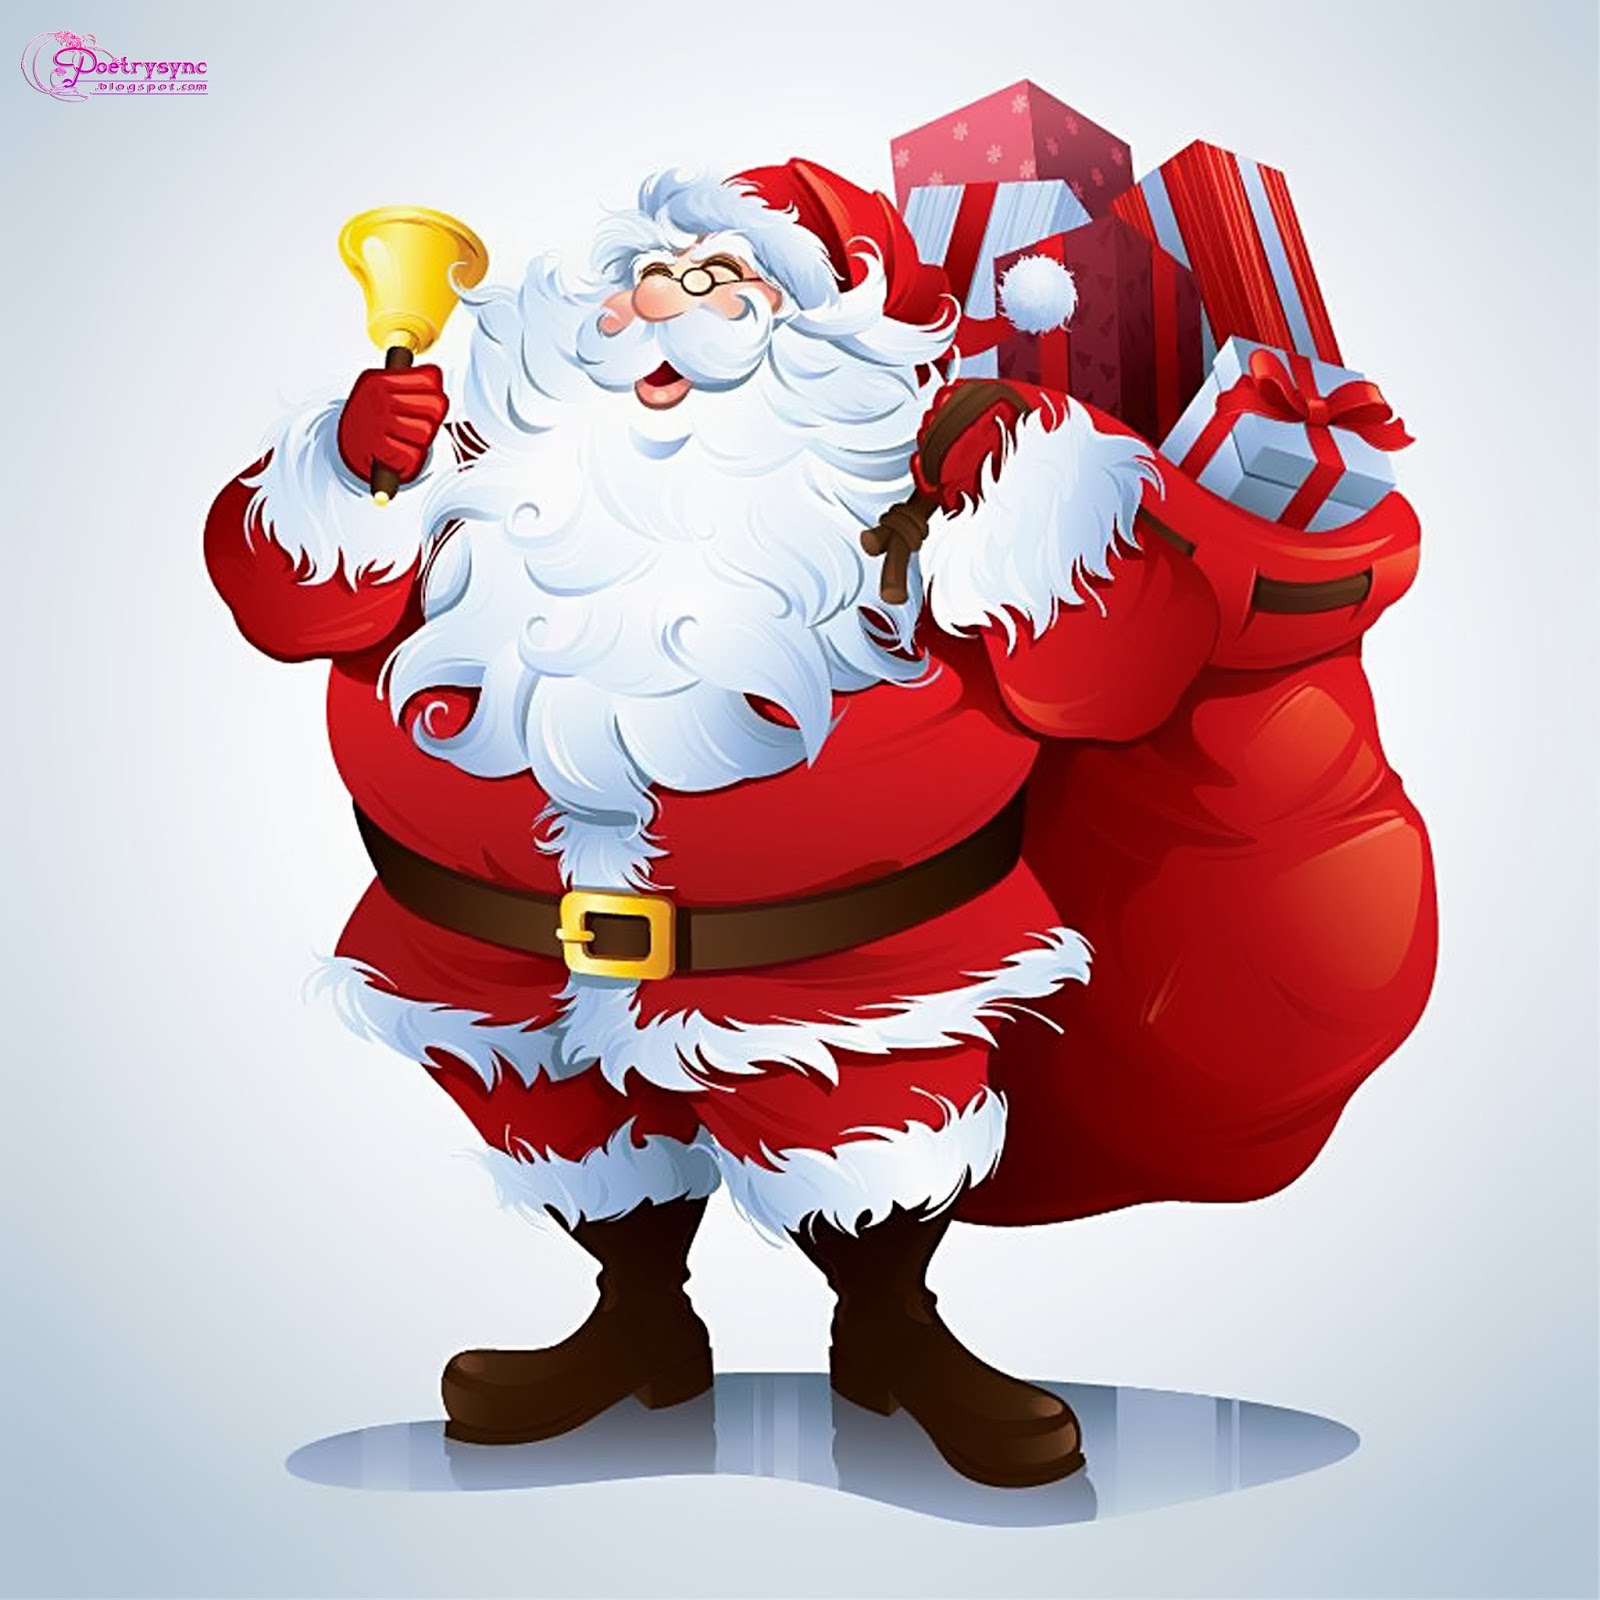     New Year  Santa Claus Hd Cliparts And Pictures For Christmas Festival